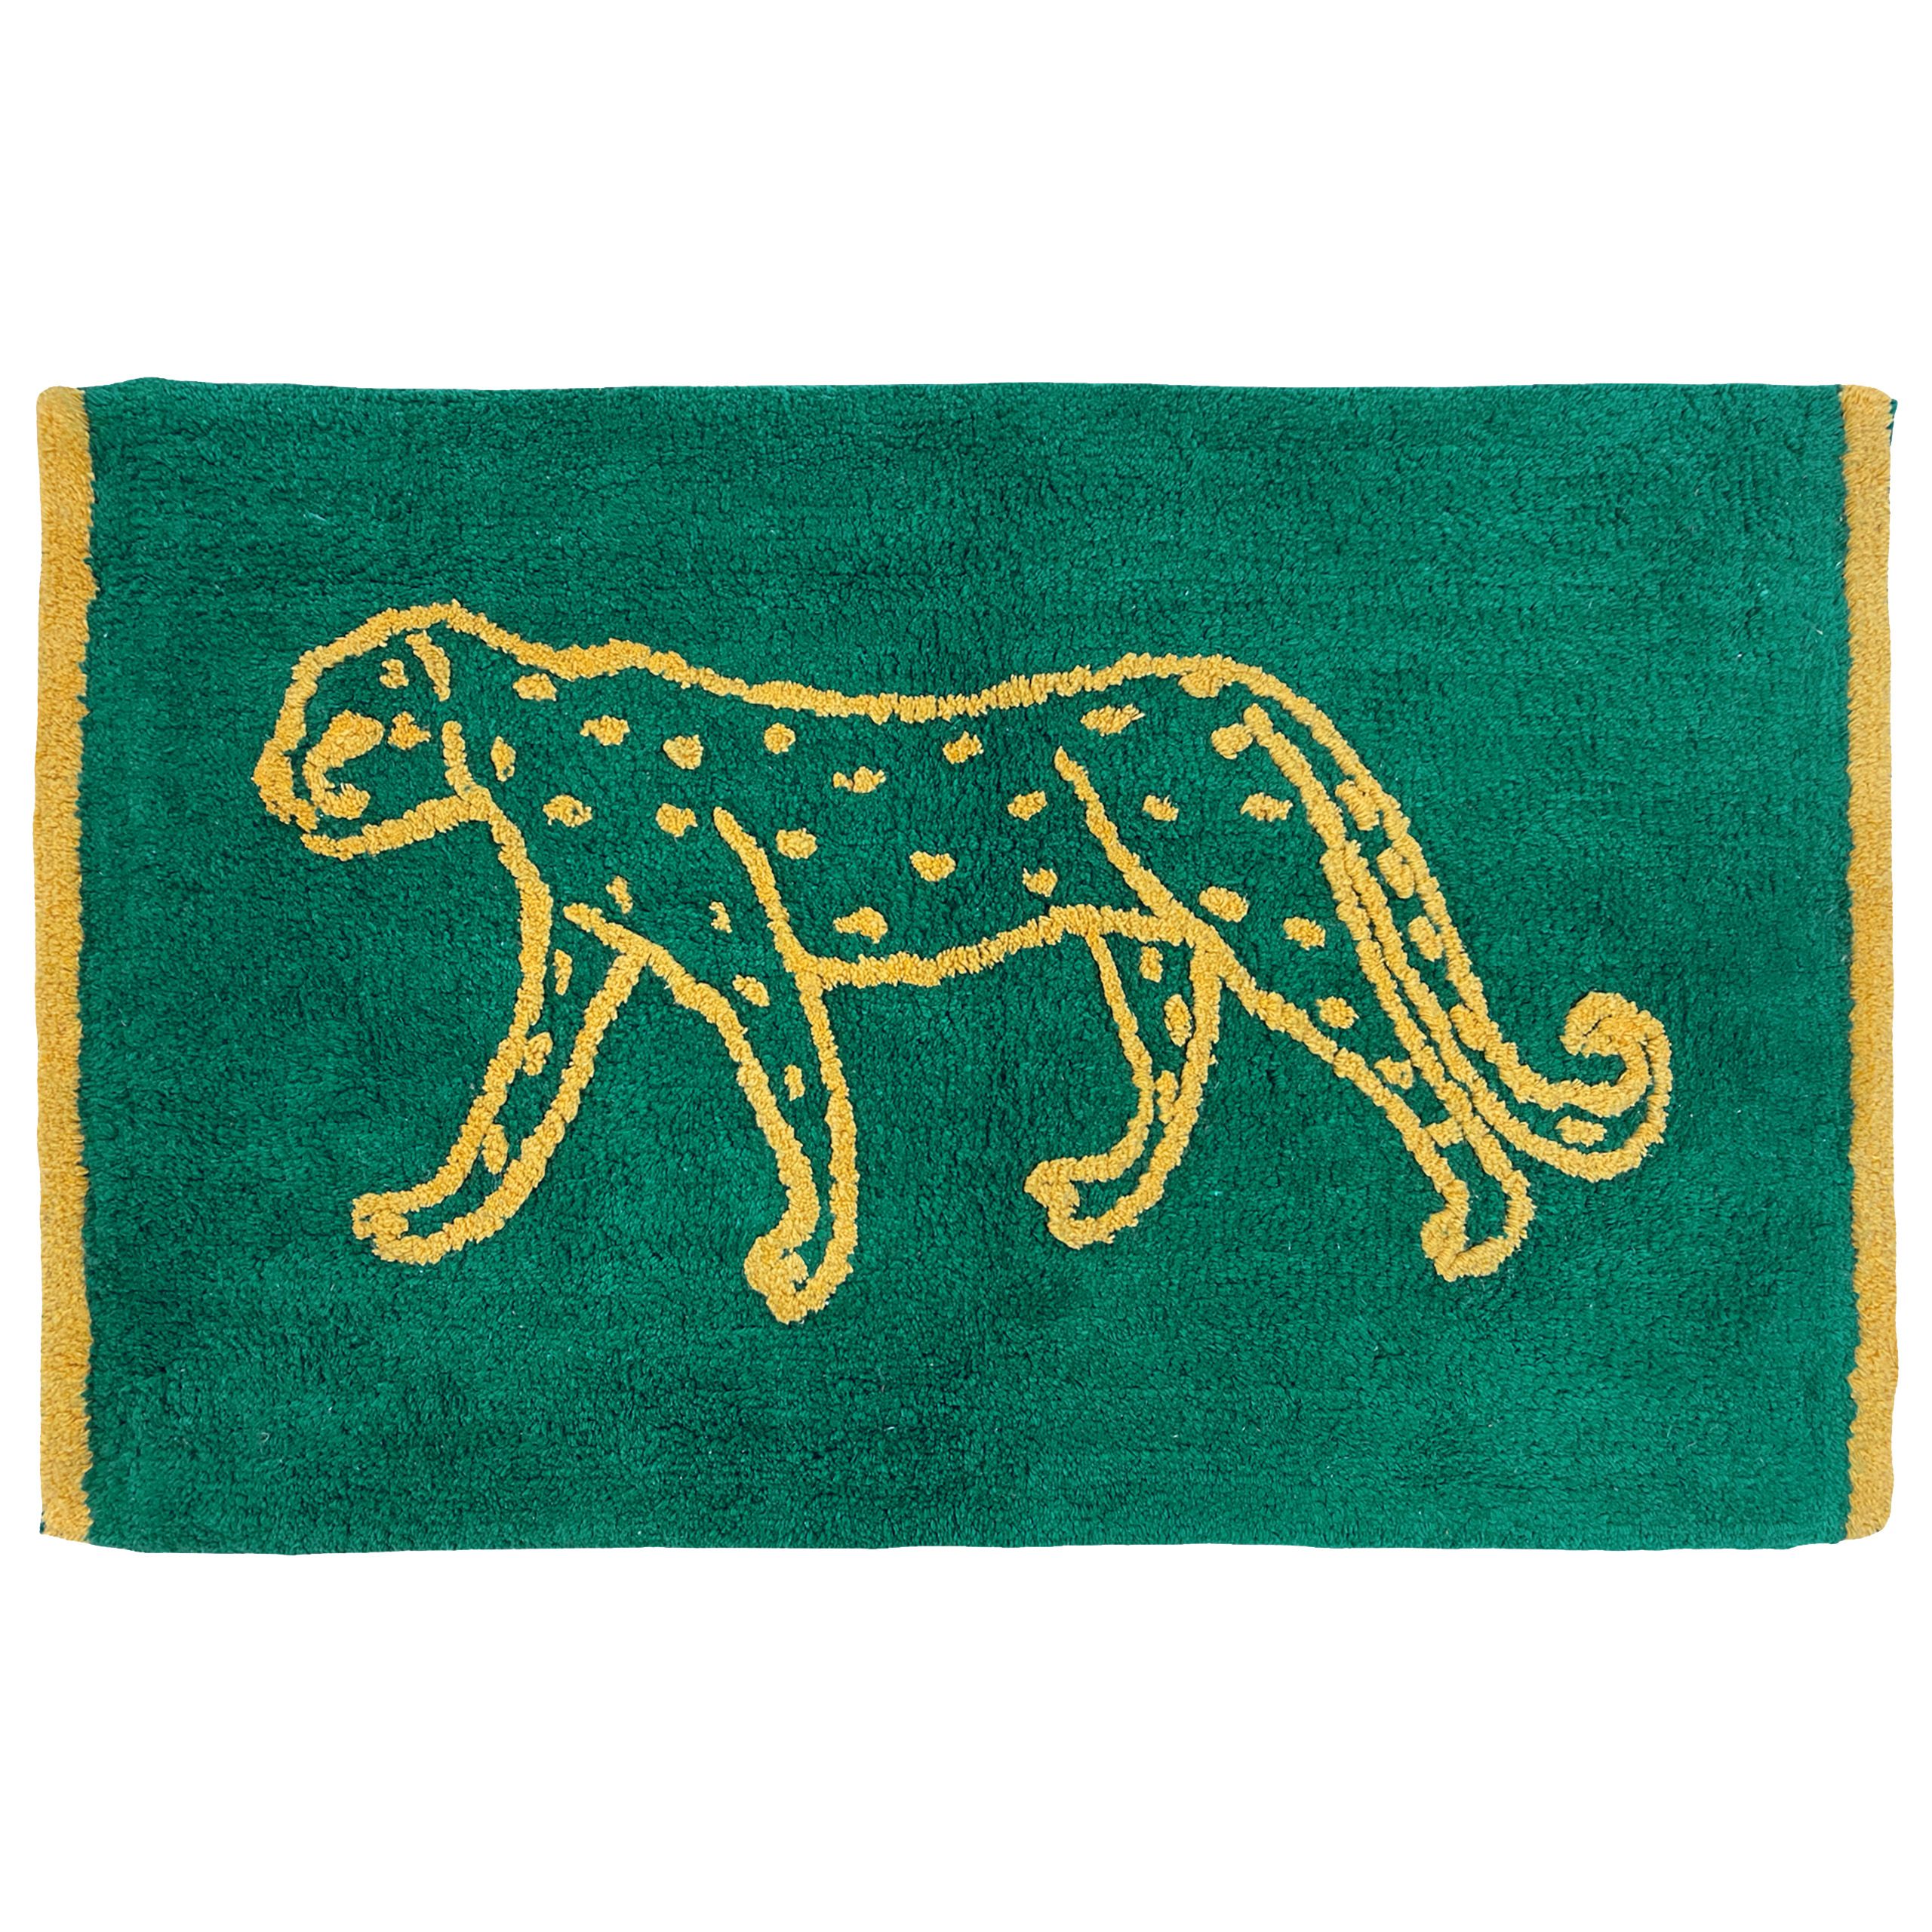 Featuring a minimalistic design of the majestic leopard, finished with a bold contrasting side trim. Made from 100% Cotton, making this bath mat incredibly soft under foot. This bath mat has an anti-slip quality, keeping it securely in place on your bathroom floor. The 1800 GSM ensures this bath mat is super absorbent preventing post-bath or shower puddles.